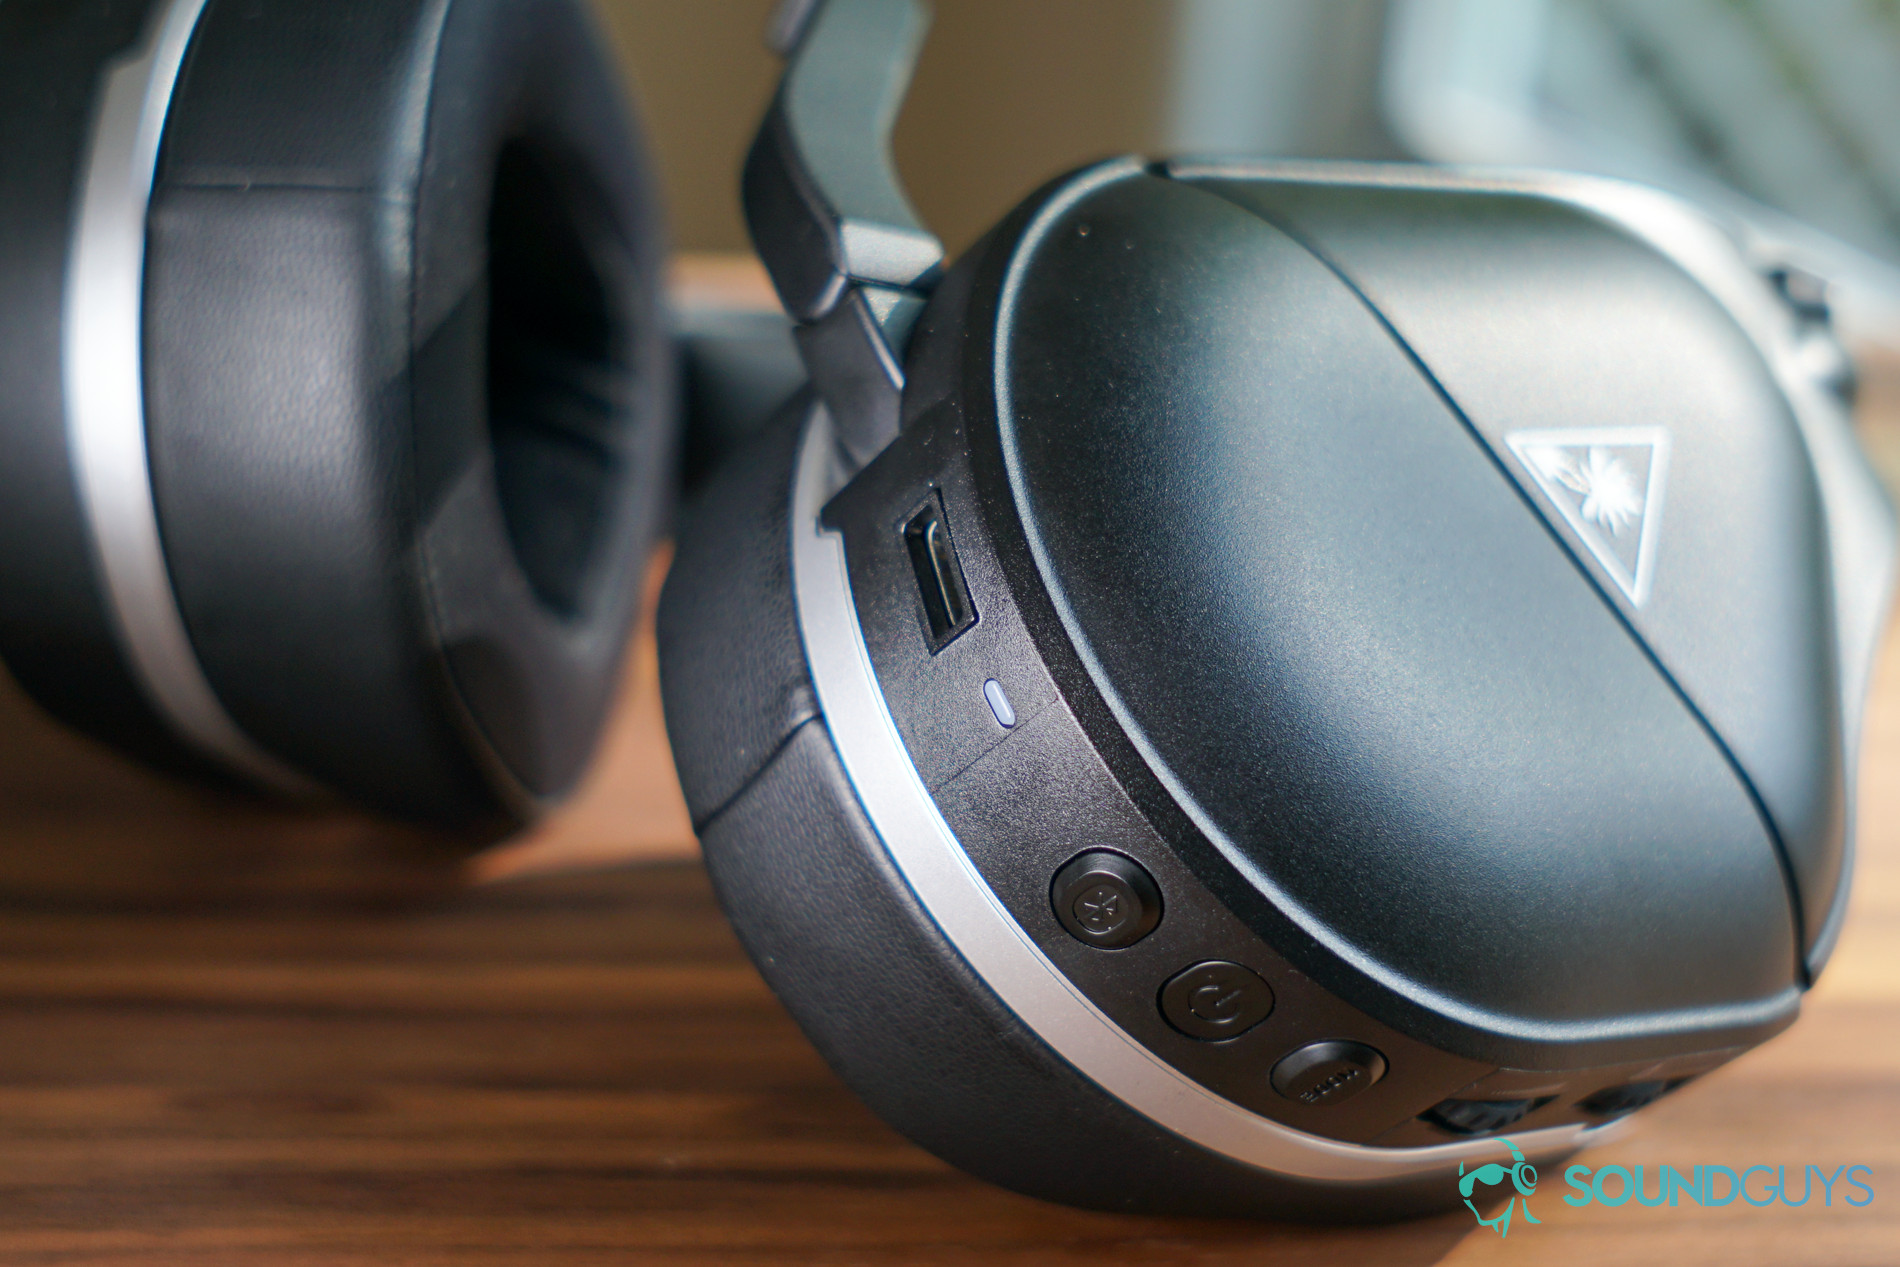 The Turtle Beach Stealth 700 Gen 2 lays on a table with its buttons and charging port in focus.